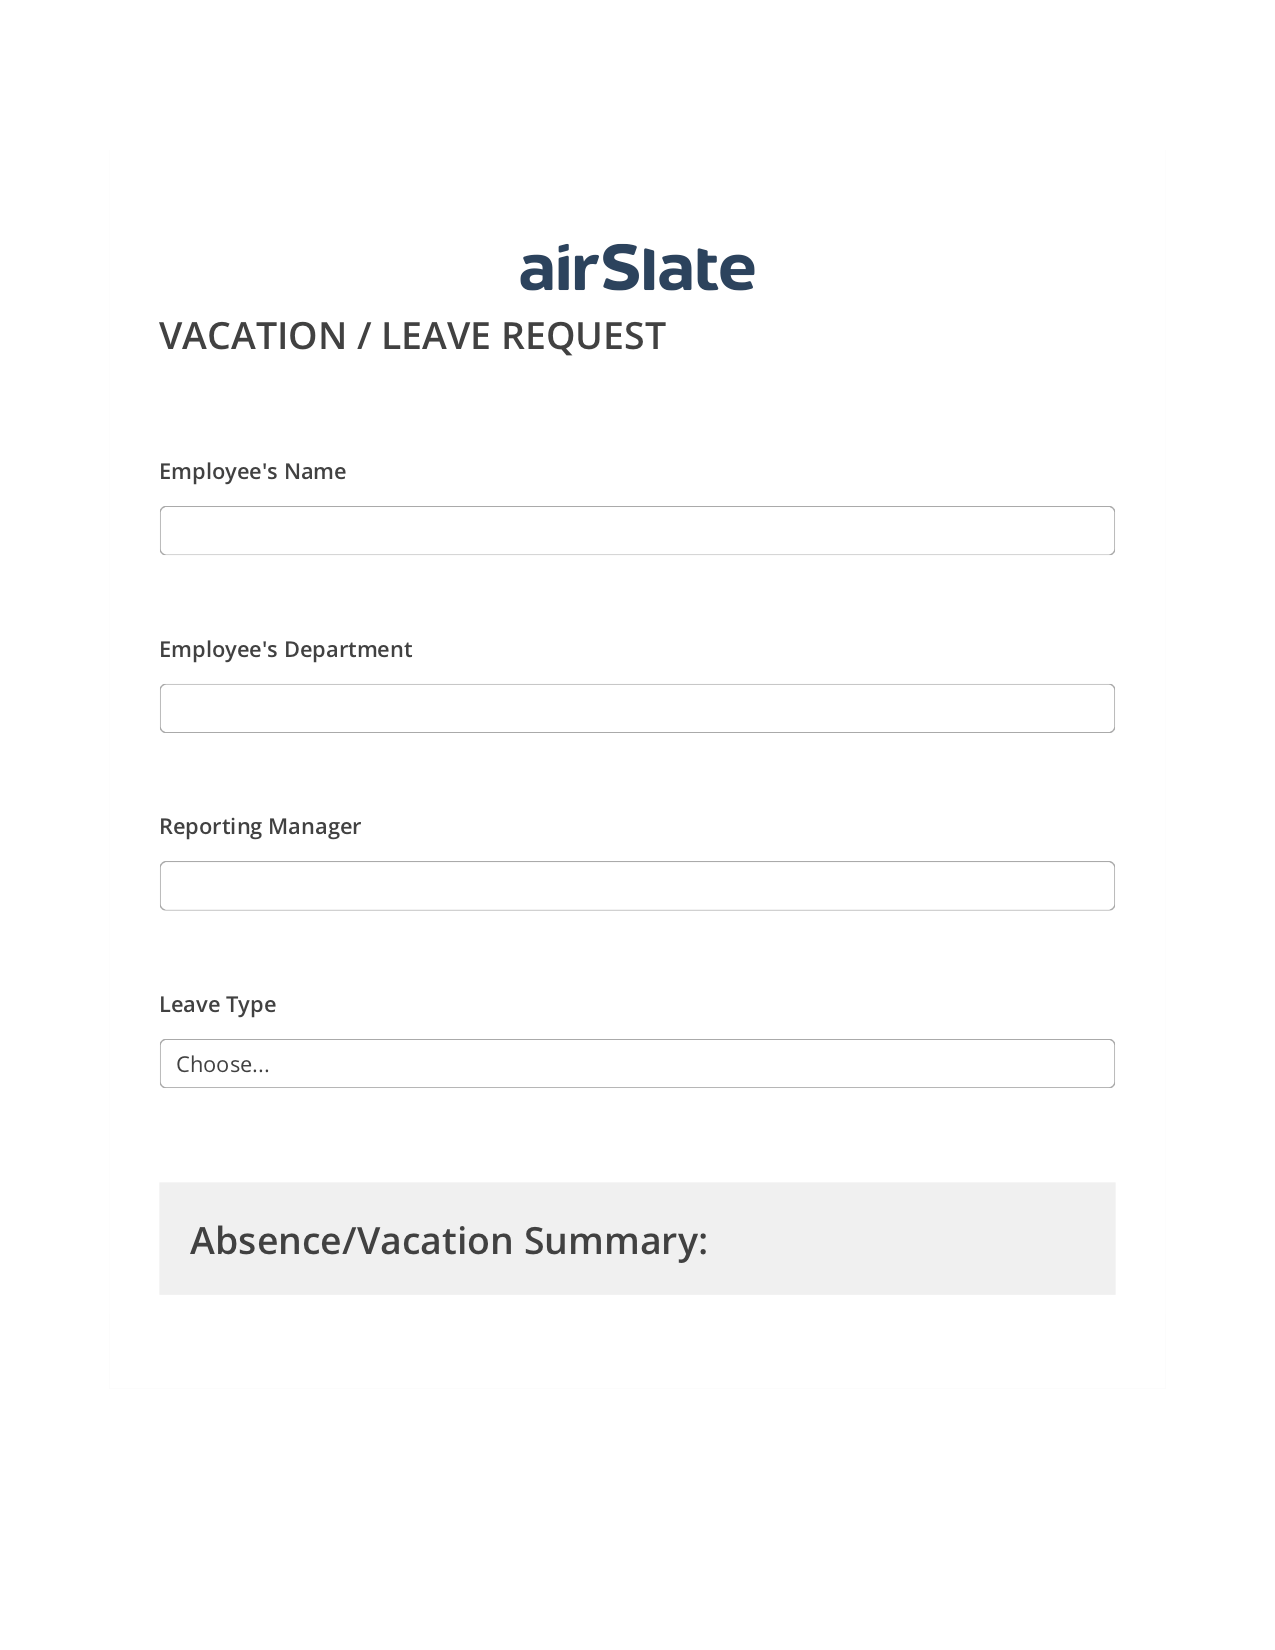 Multirole Vacation/Leave Request Workflow Pre-fill from another Slate Bot, Invoke Salesforce Process Bot, Archive to OneDrive Bot